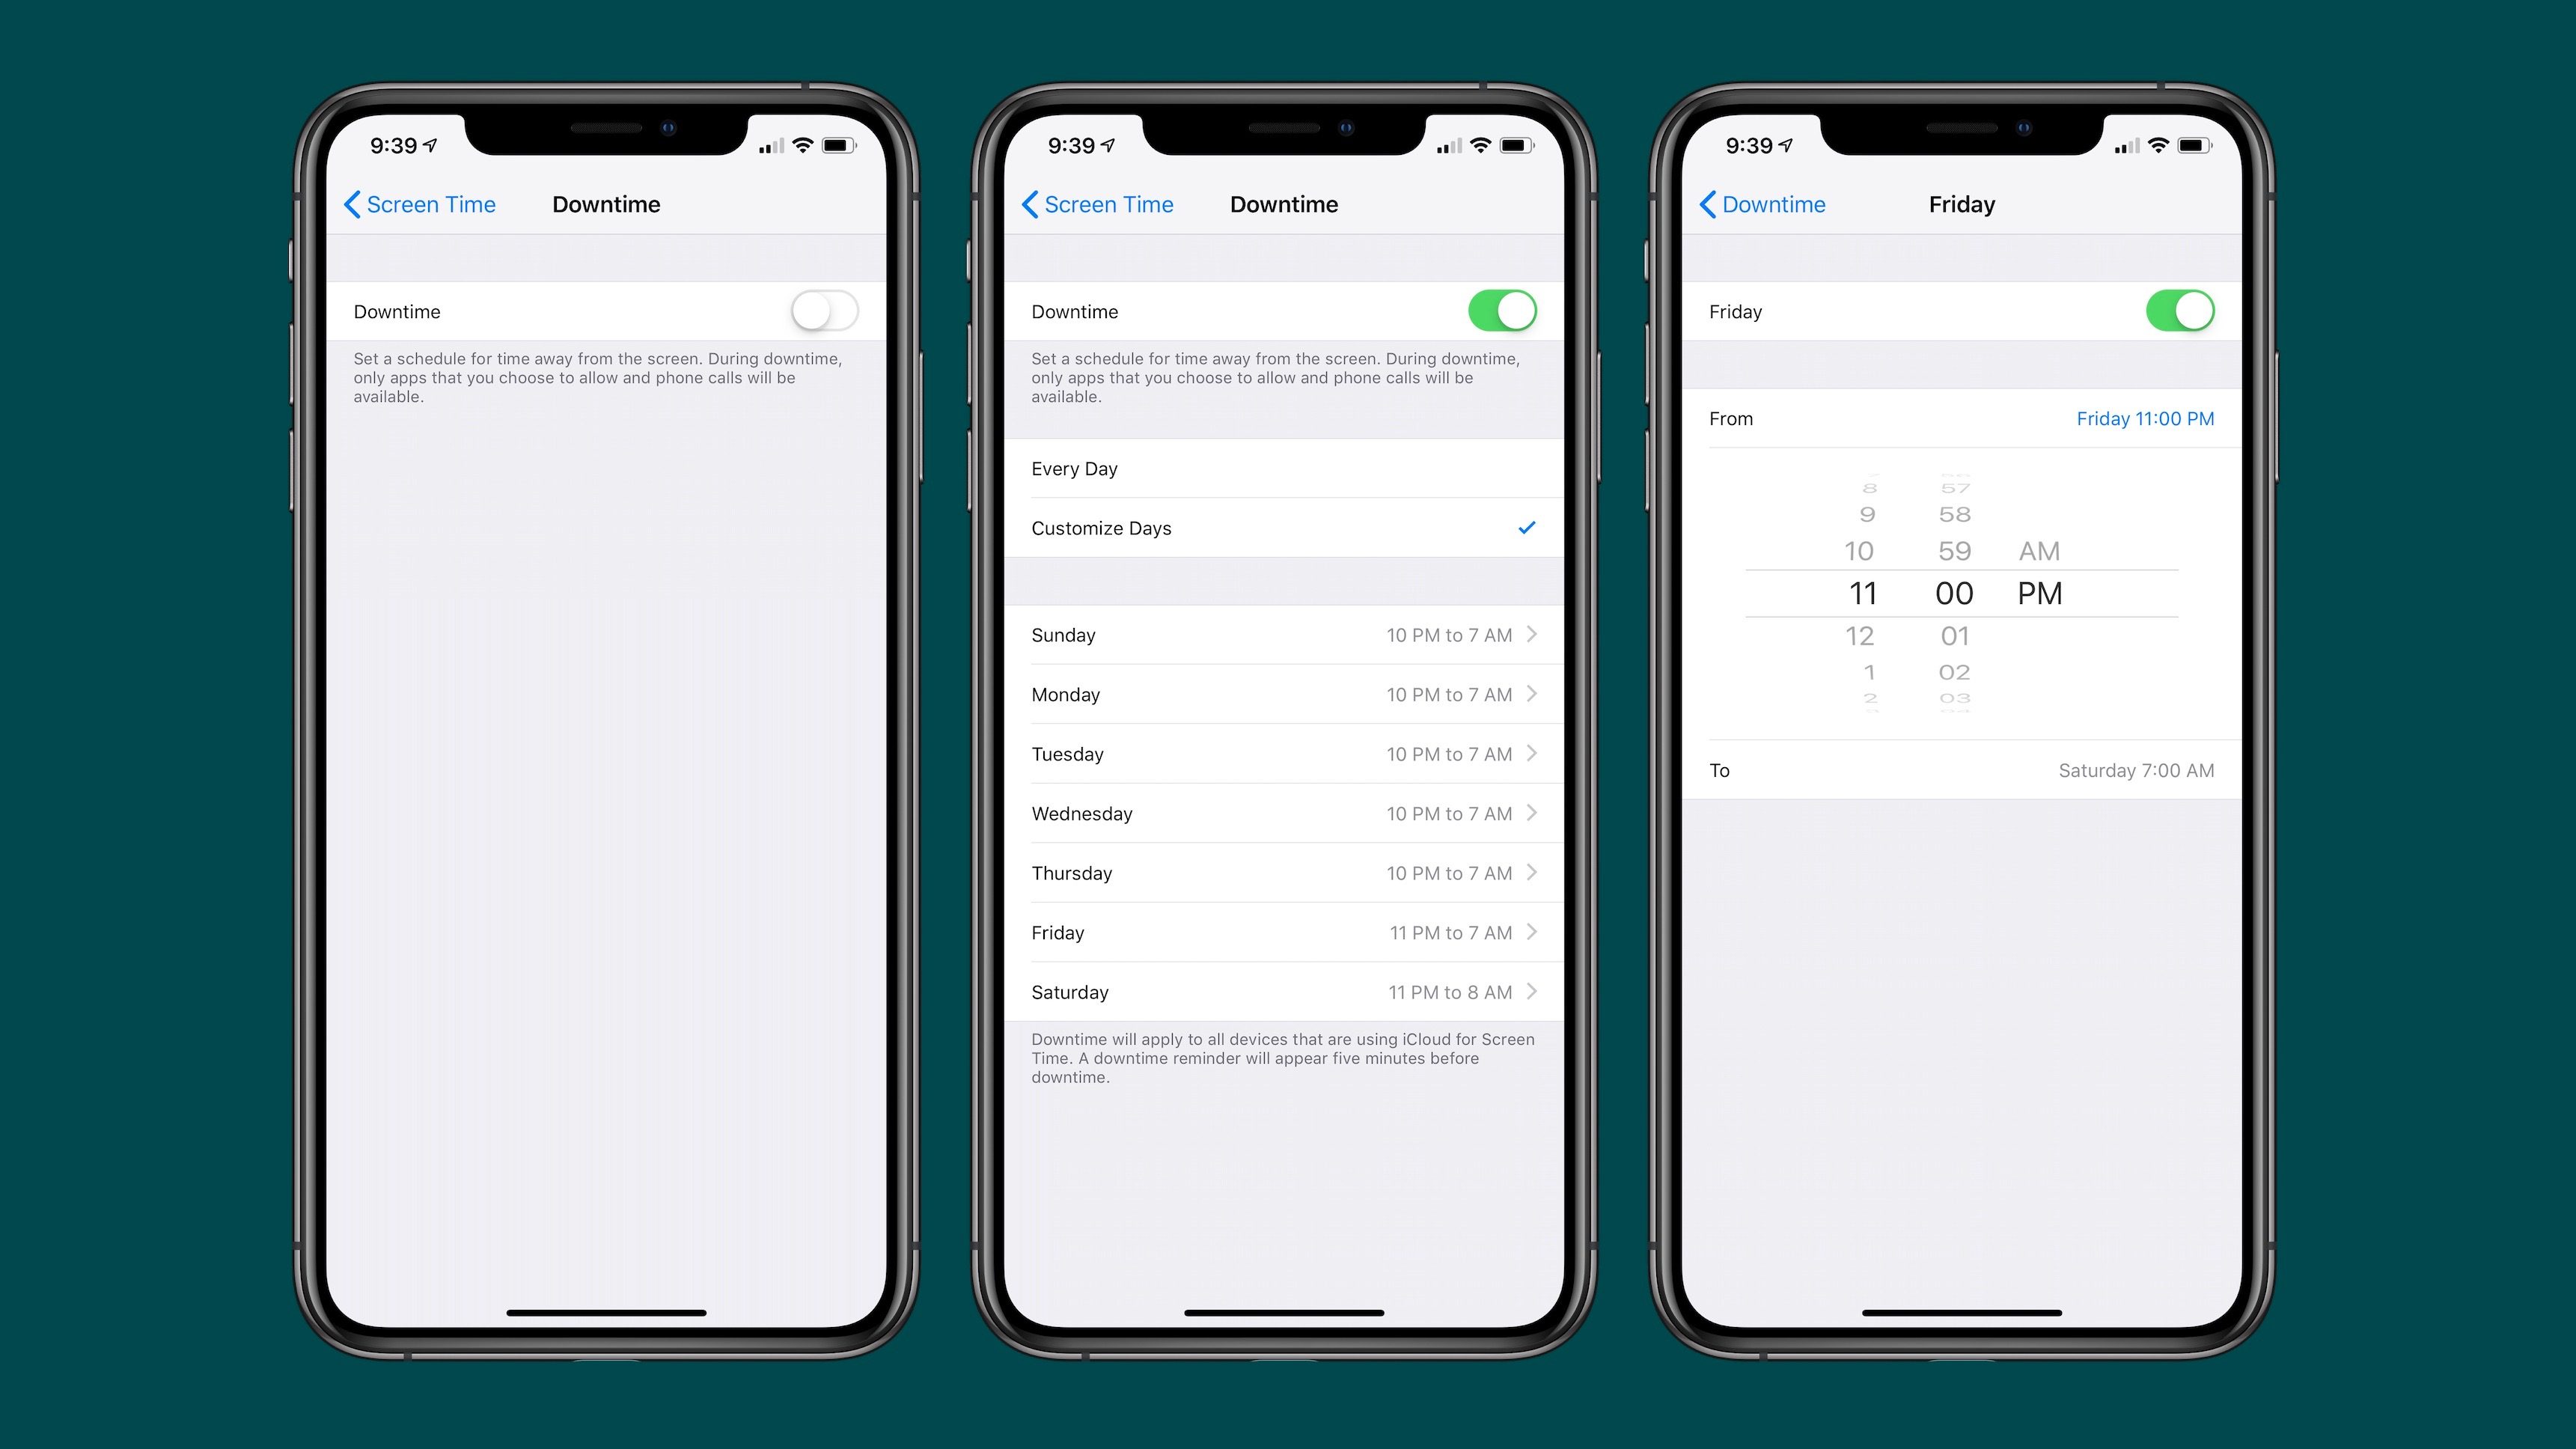 iOS 12.2 Beta Allows you to Customize Downtime in Screen Time by days of the week